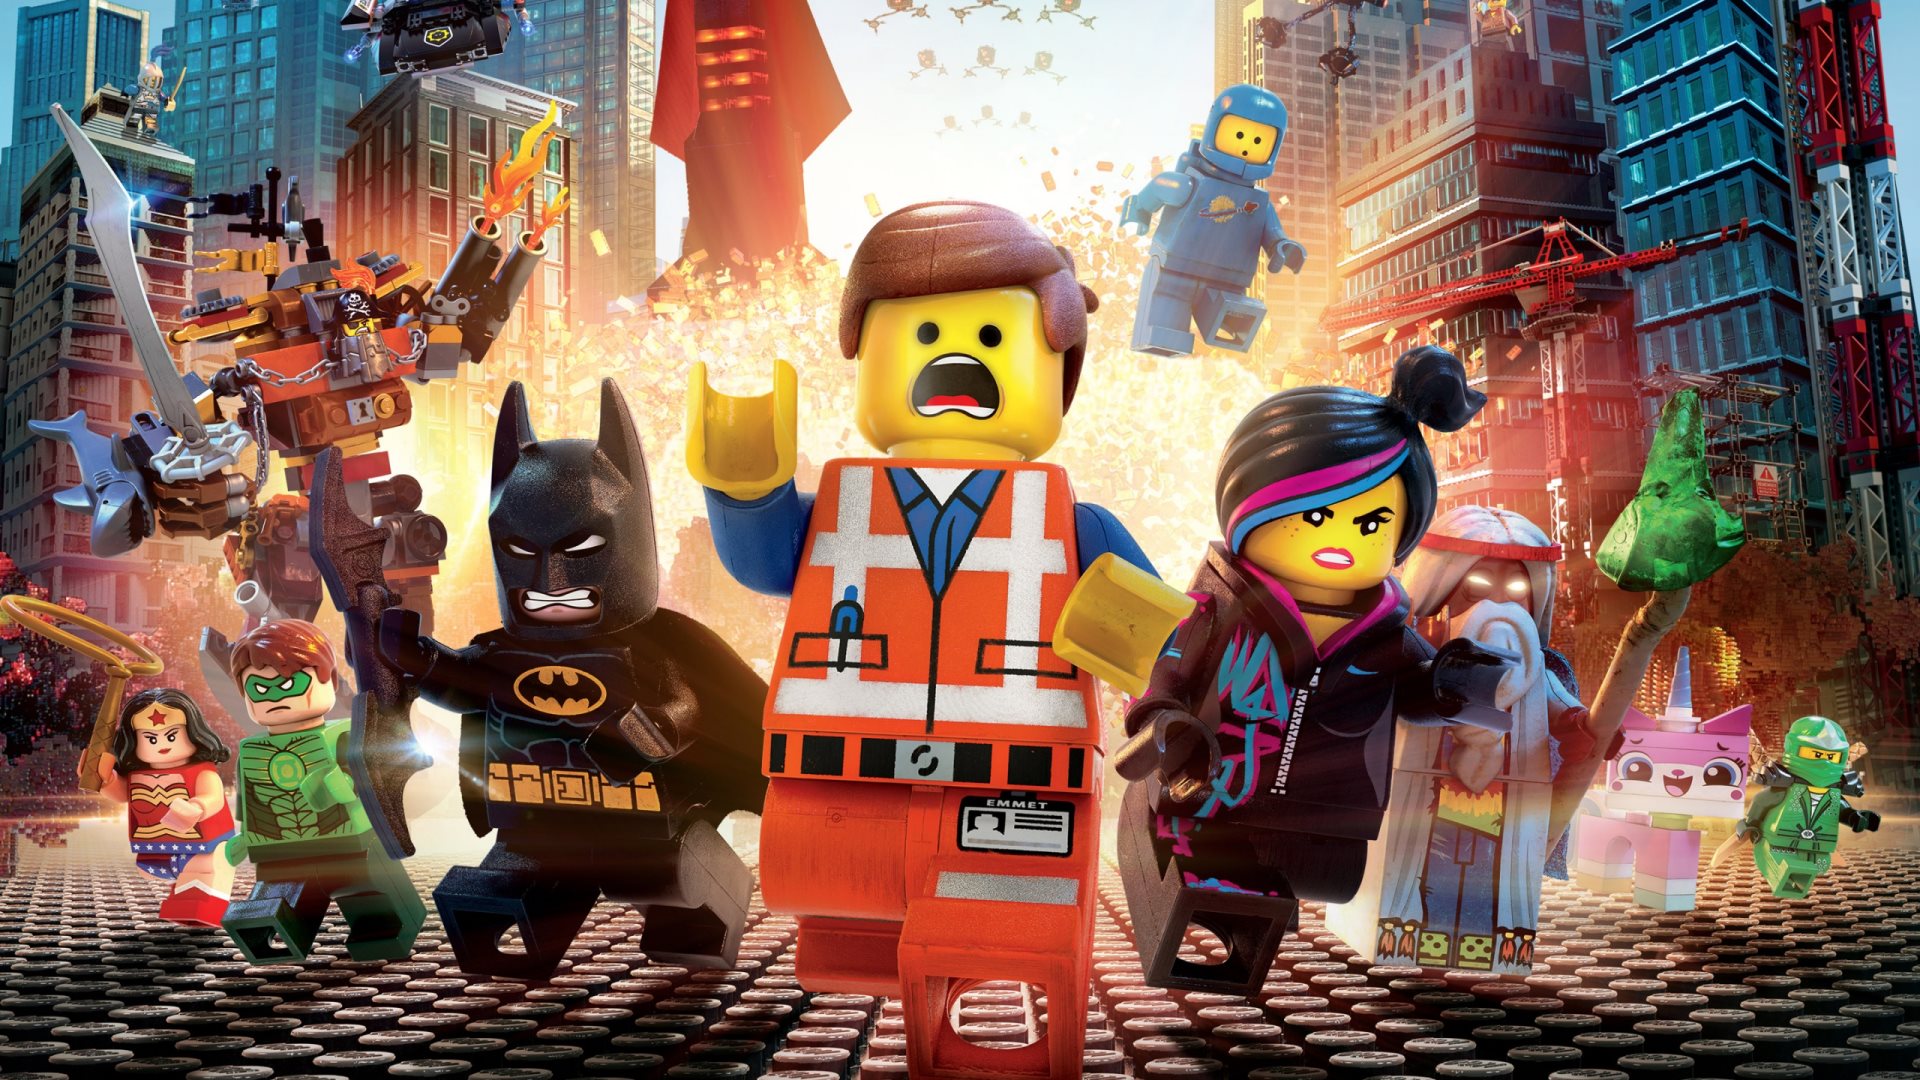 Lego Benny The Lego Movie Emmet The Lego Movie Space Wyldstyle The LEGO Movie Cop Lord Business Batm 1920x1080